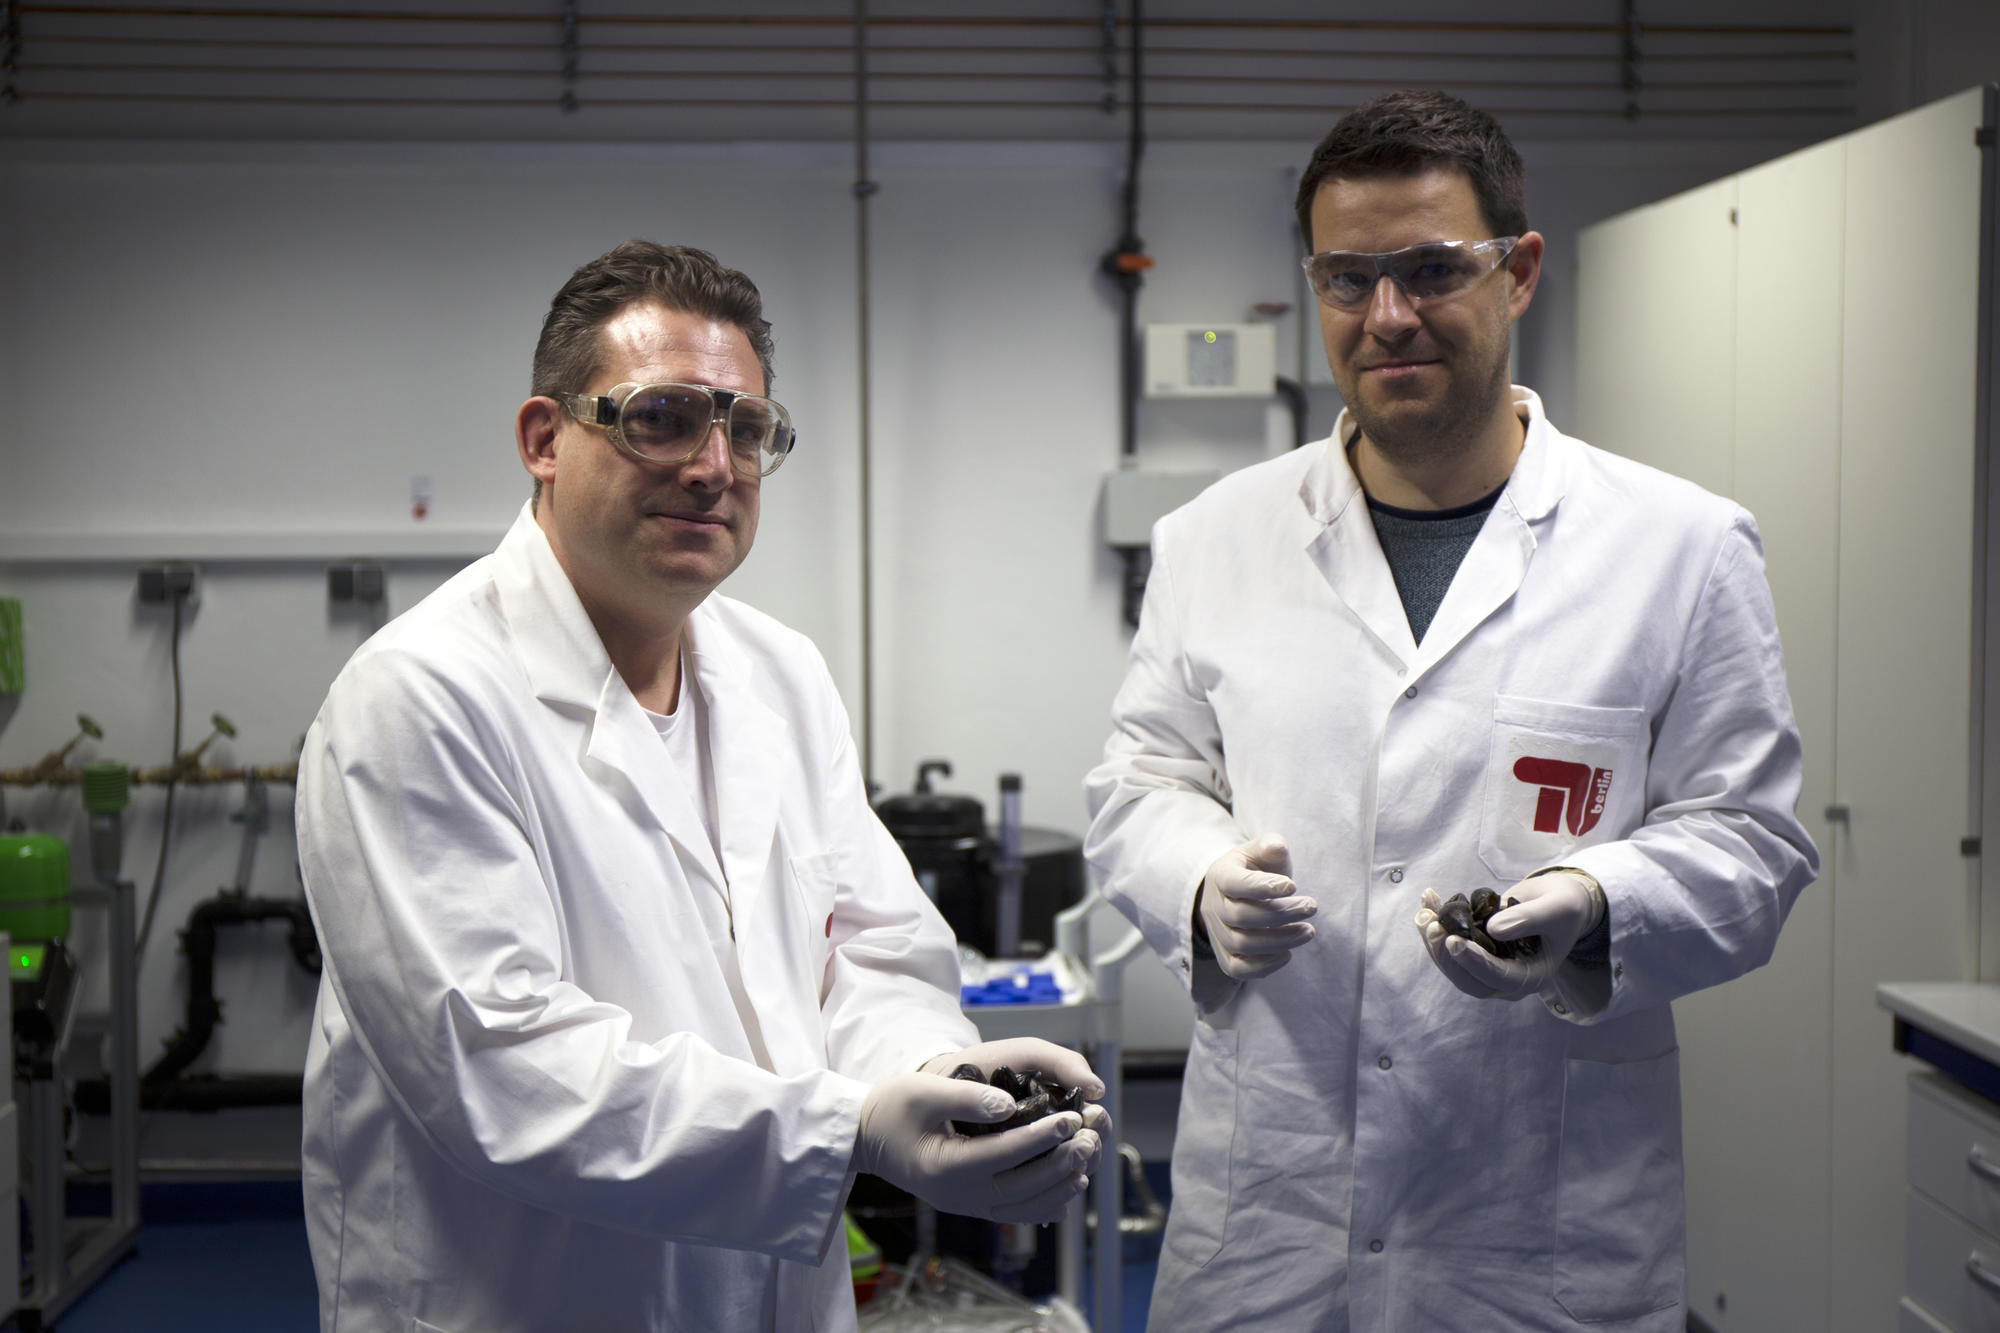 In order to produce the mussel glue in the laboratory, Dipl.-Ing. Christian Schipp (left), Dr. Matthias Hauf (right) and other researchers at the UniCat Cluster of Excellence reprogrammed strains of the intestinal bacterium, Escherichia coli.